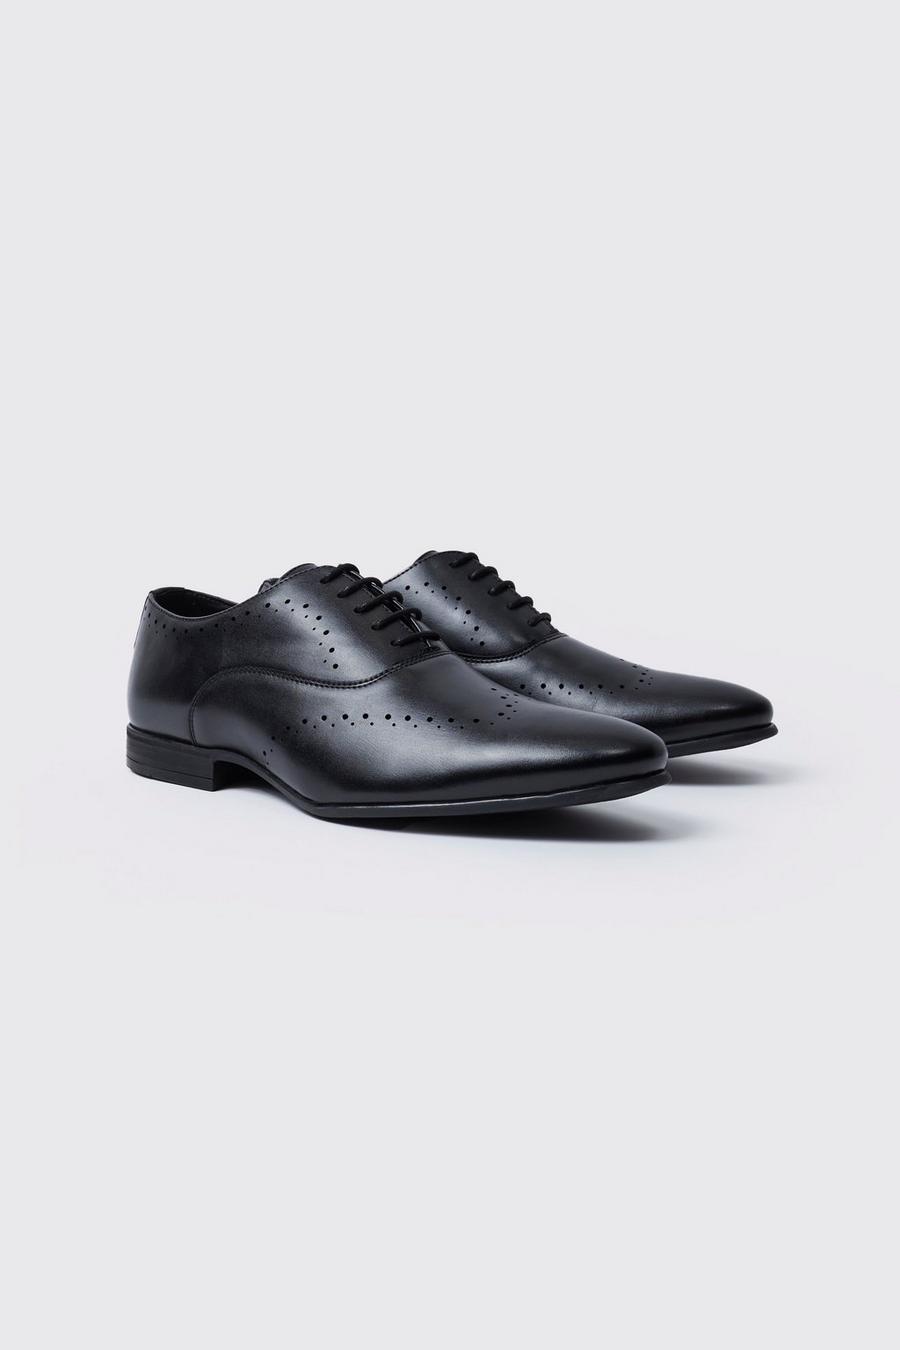 Black Perforated Detail Smart Derby Mizuno Shoes